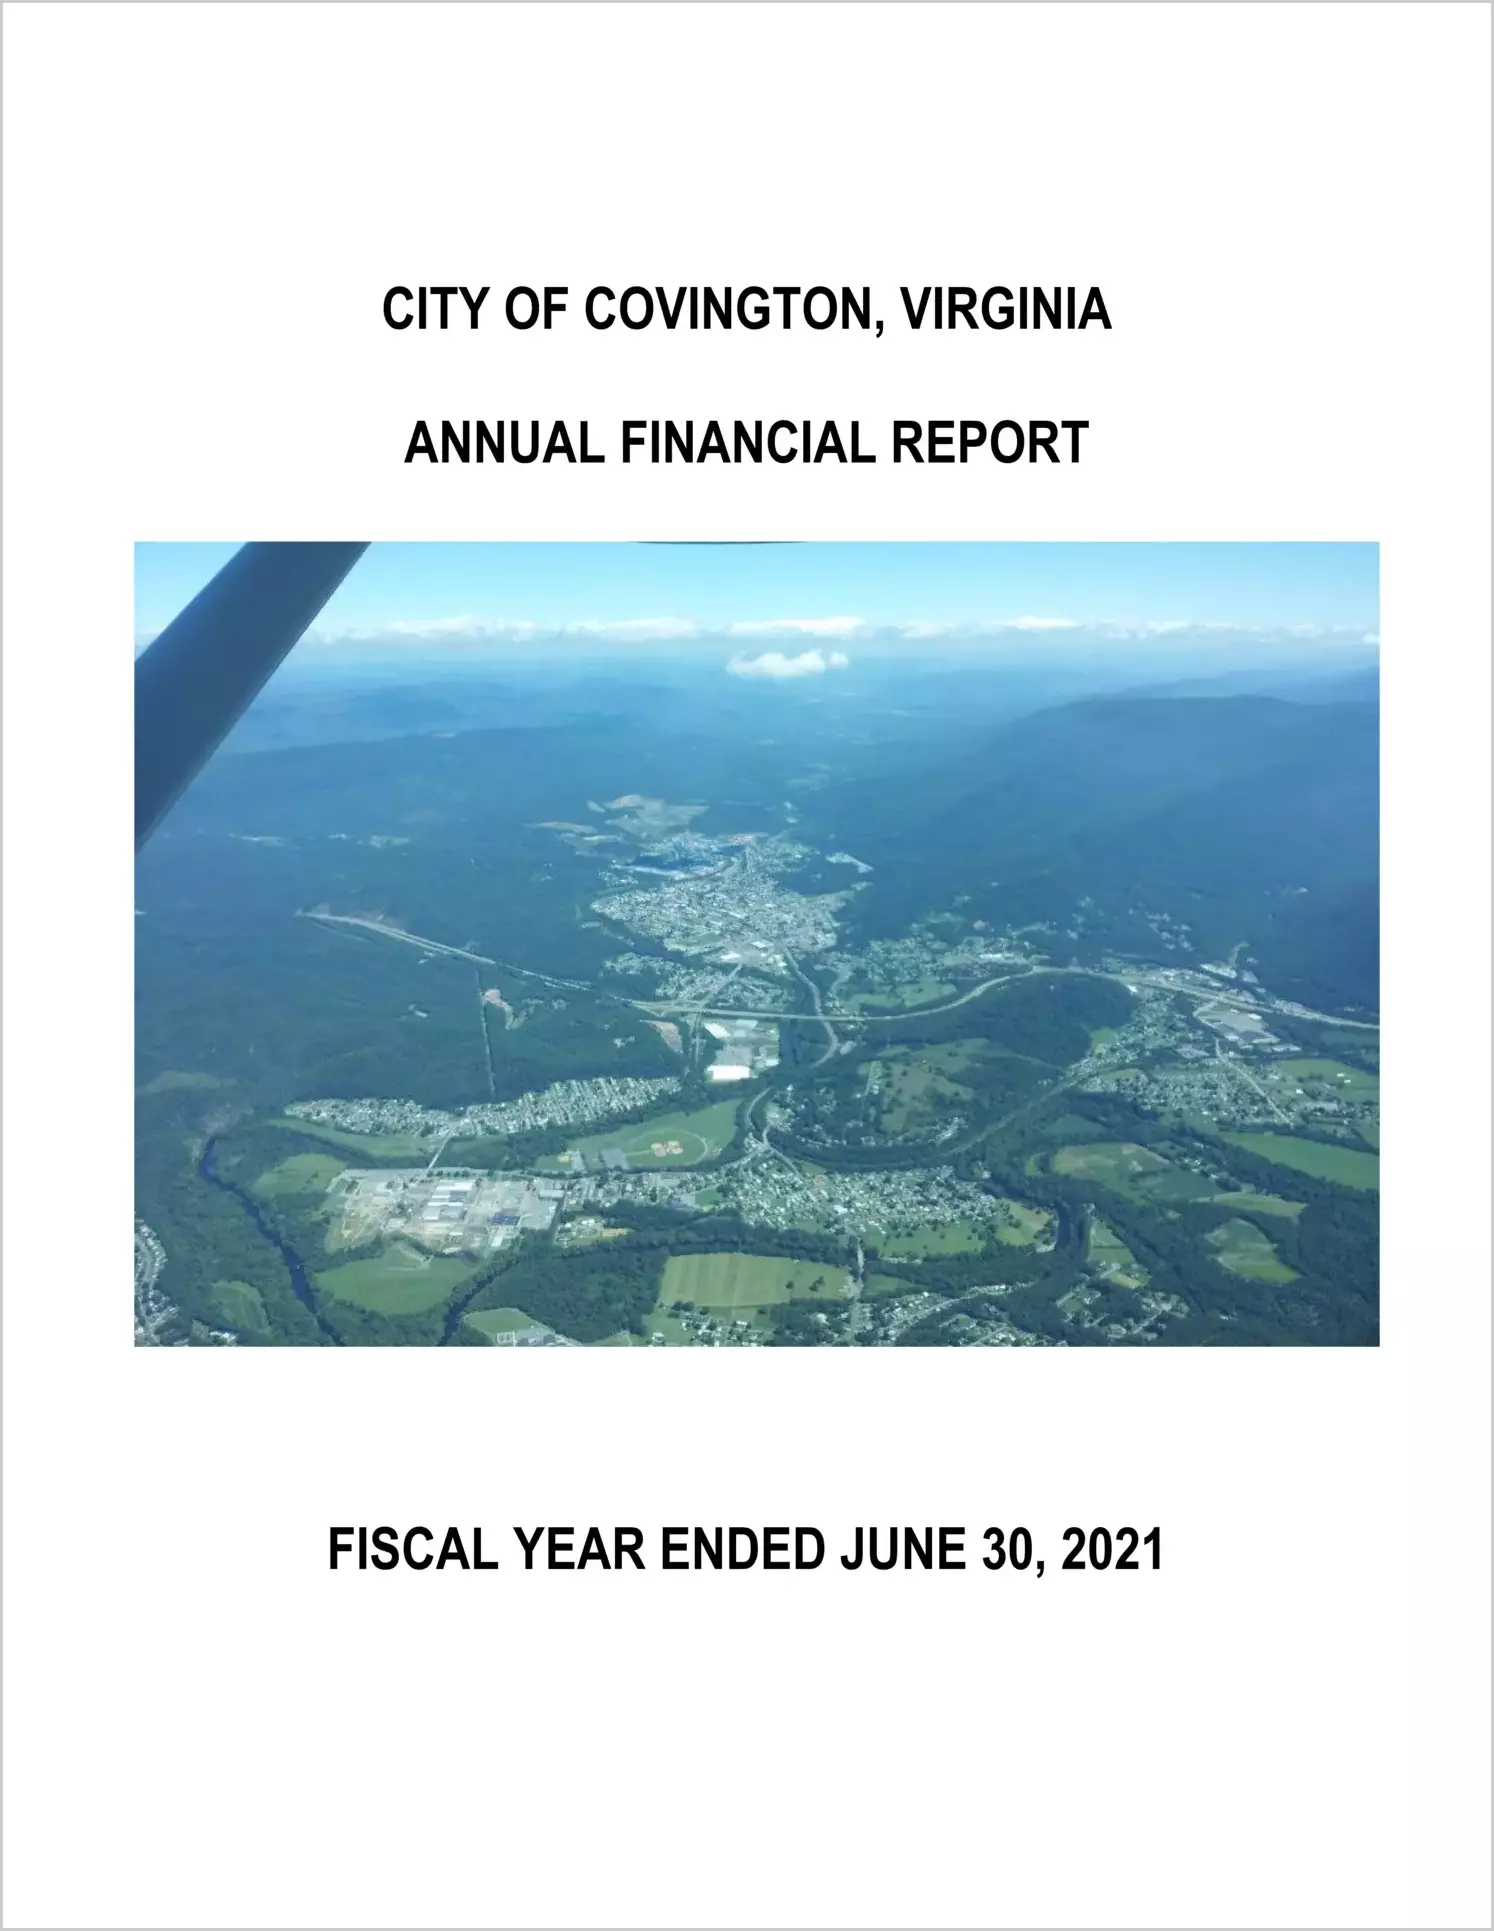 2021 Annual Financial Report for City of Covington